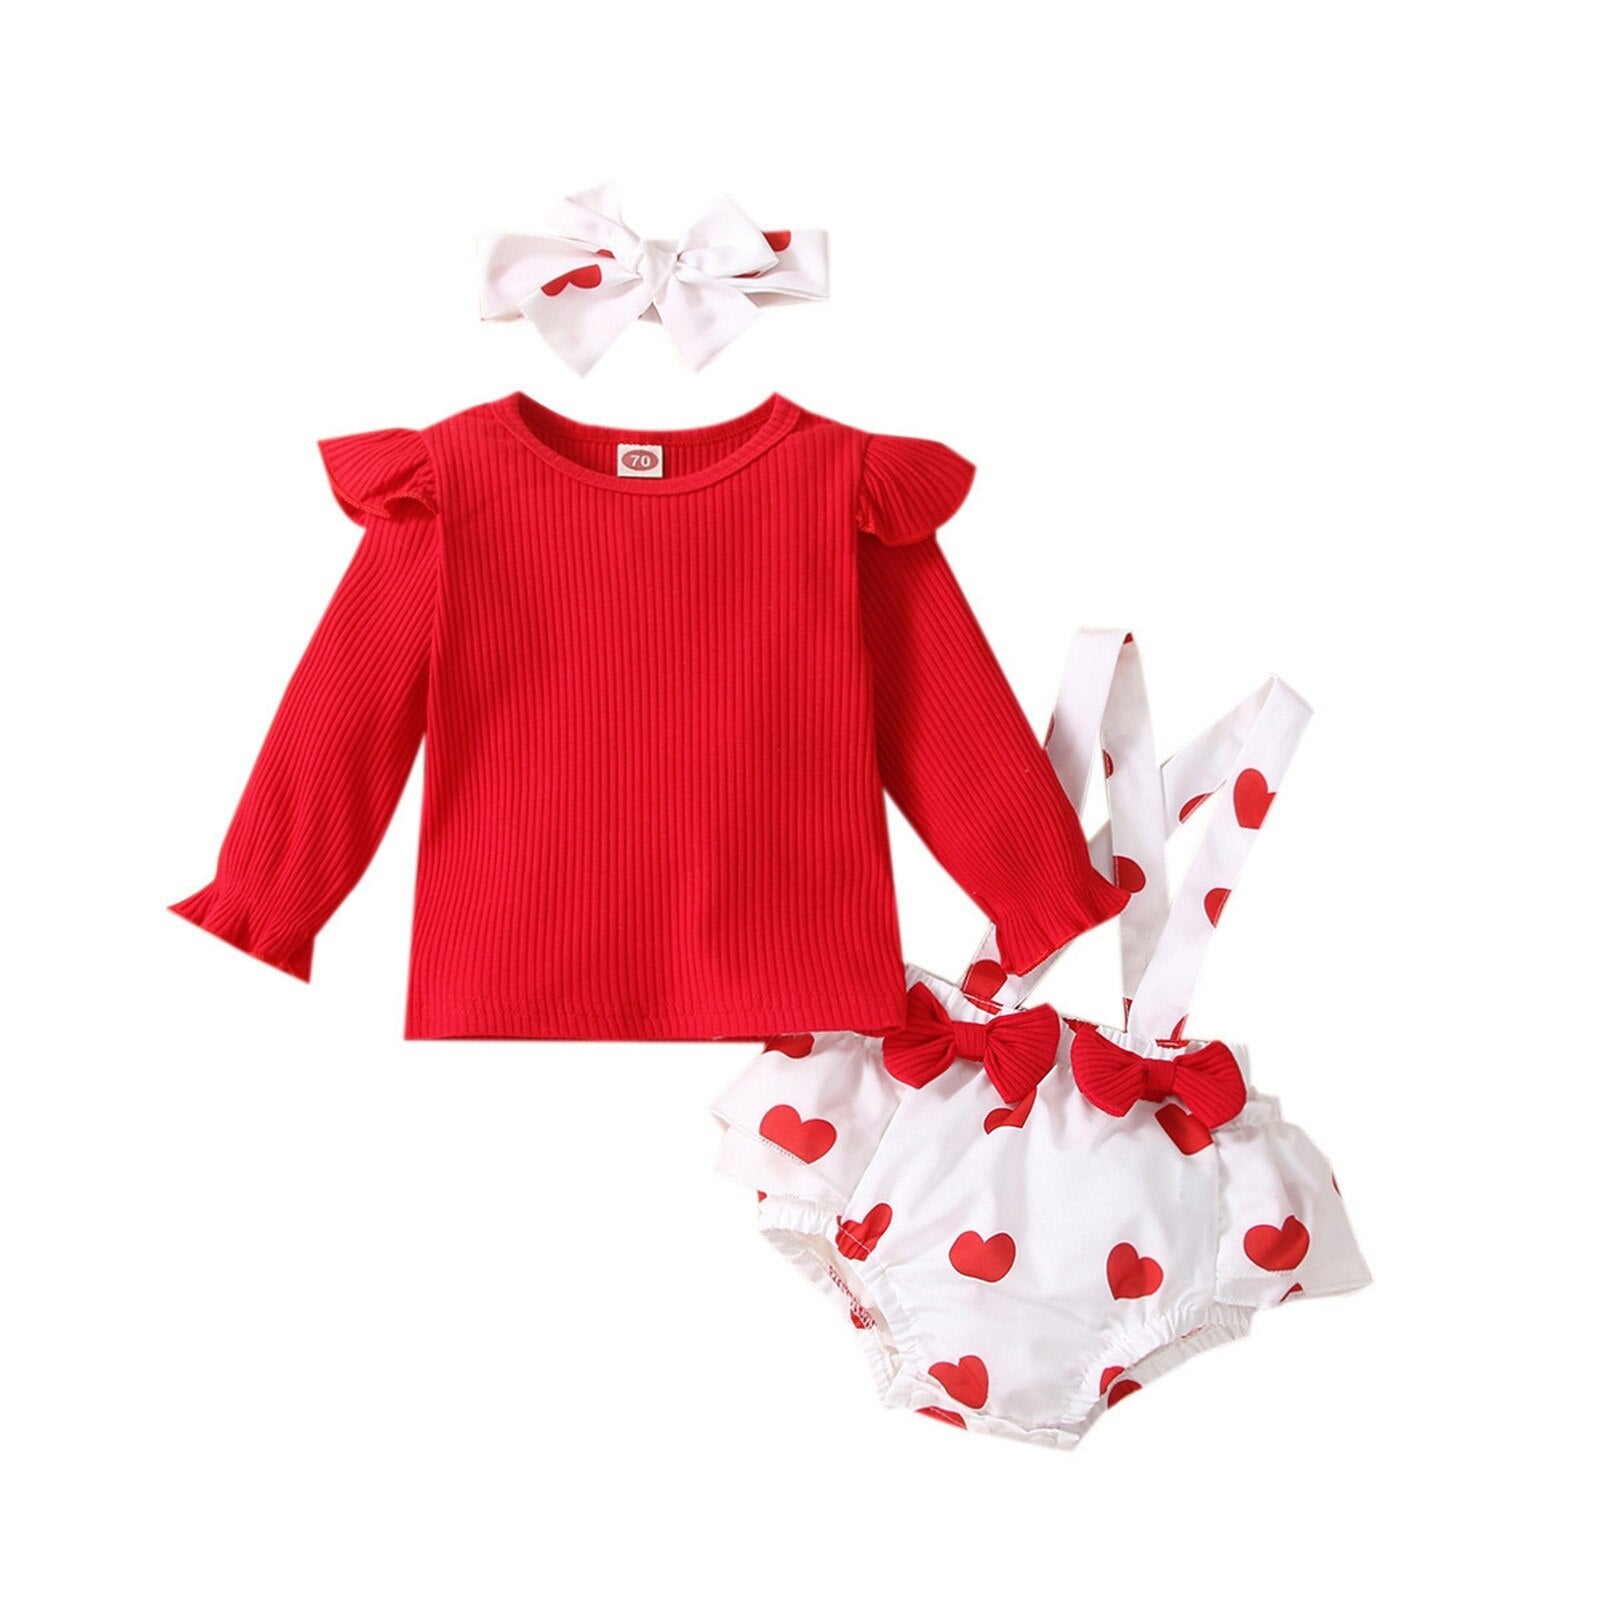 Get Ready for Valentine's Day with Adorable Heart Print Romper Sets for Baby Girls